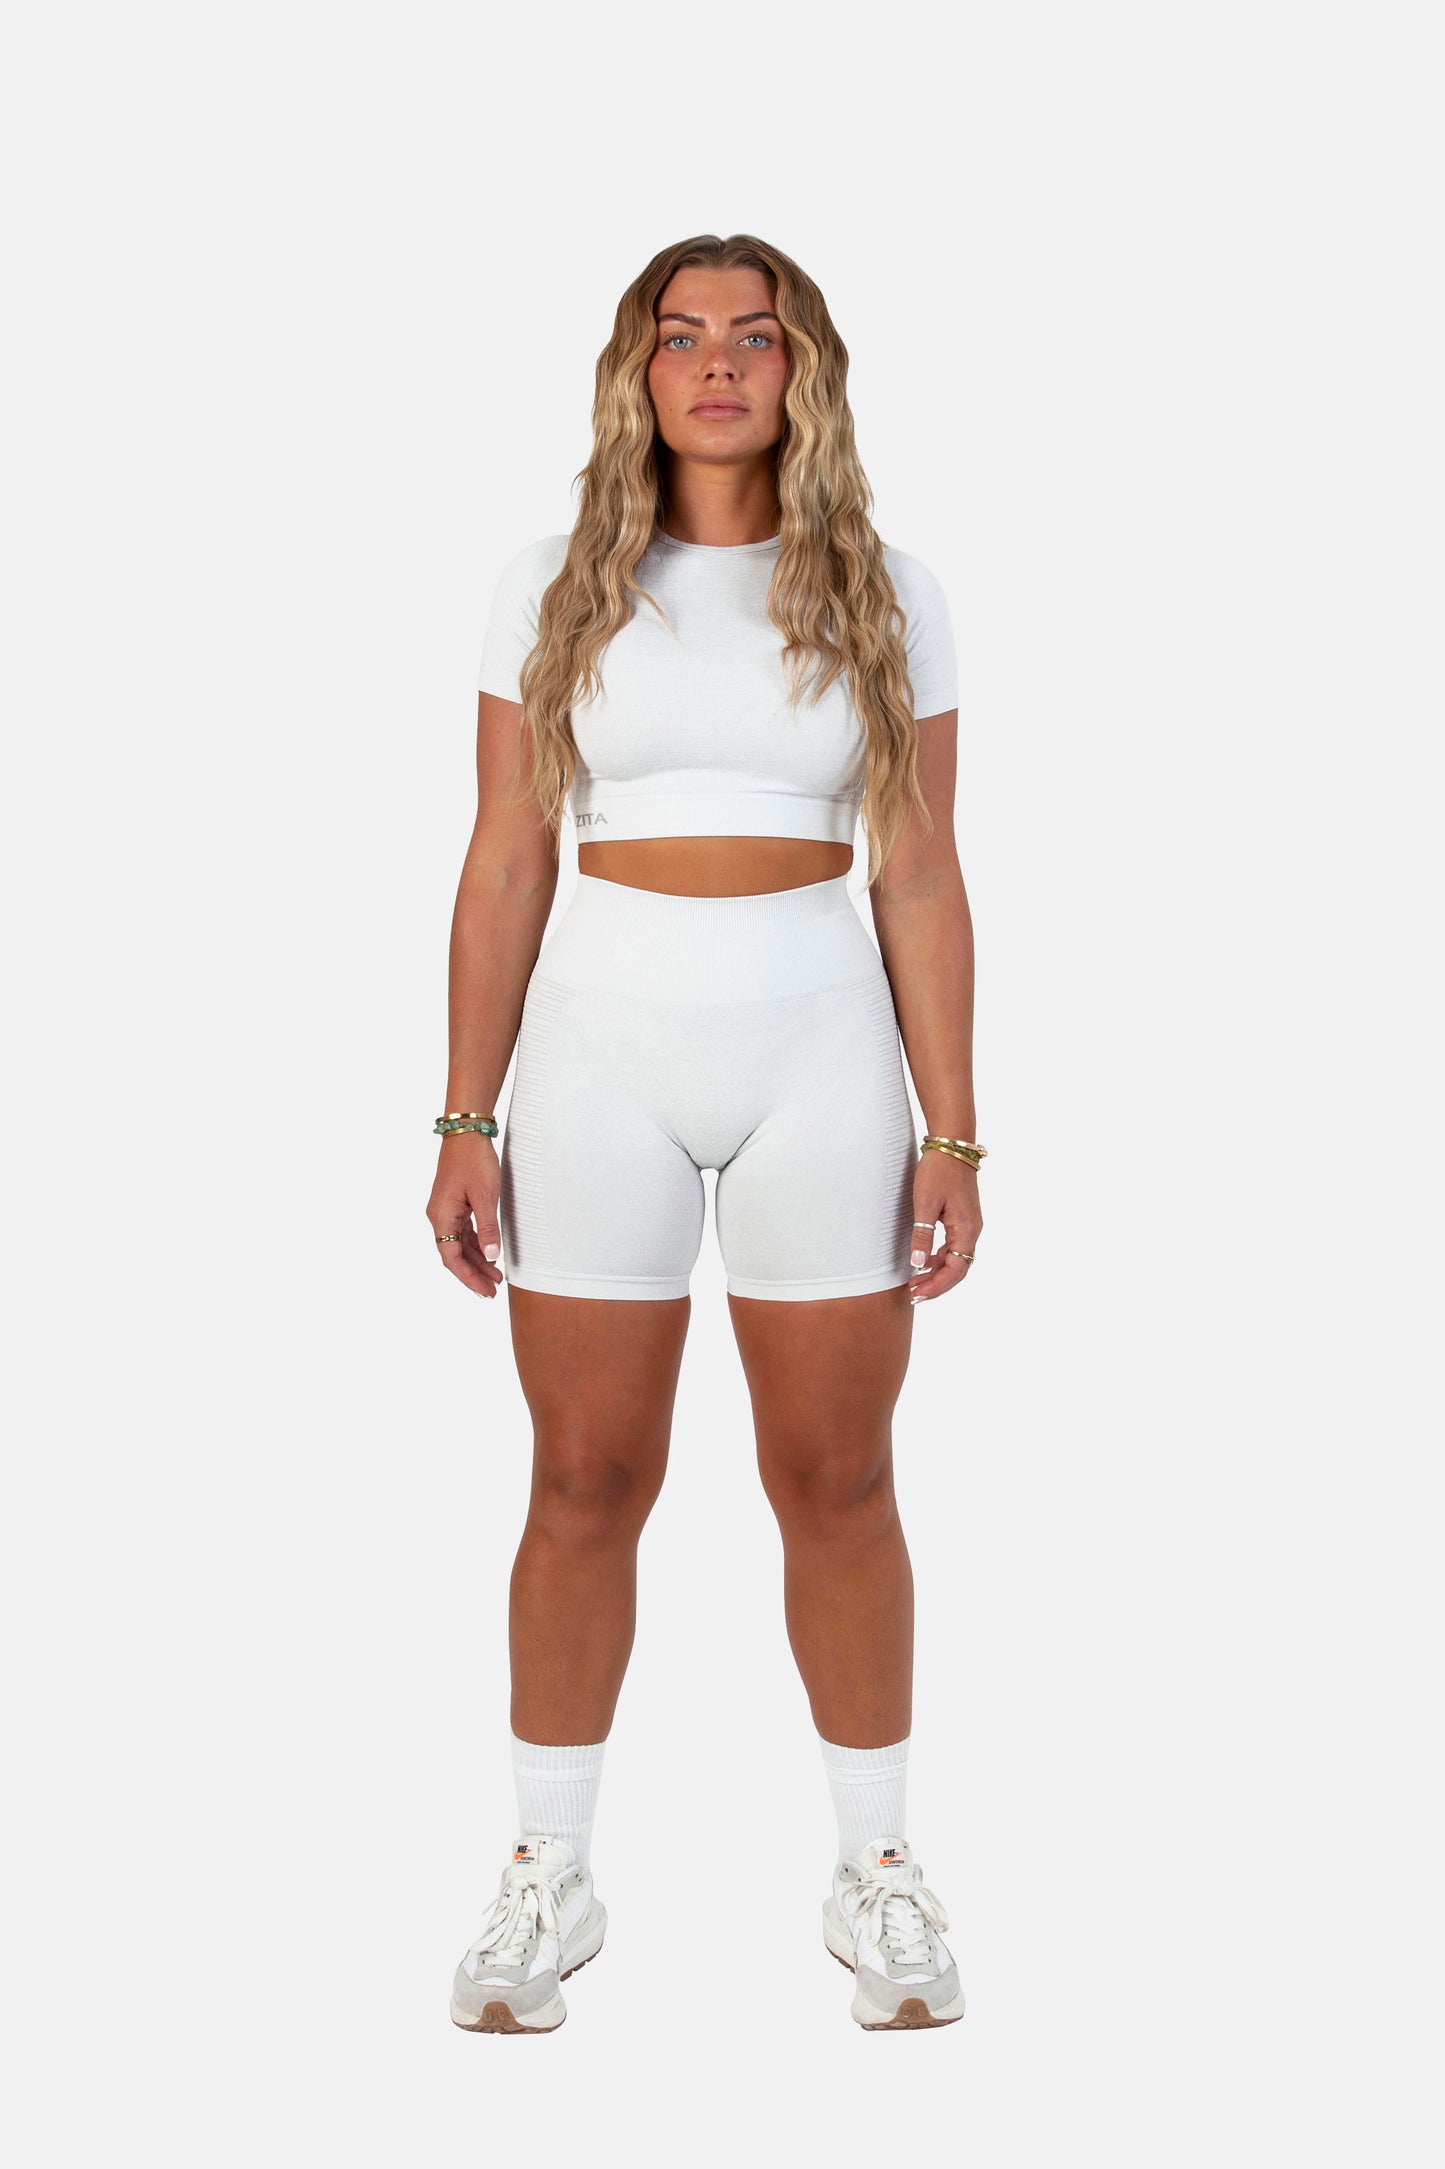 gym clothing and activewear for women